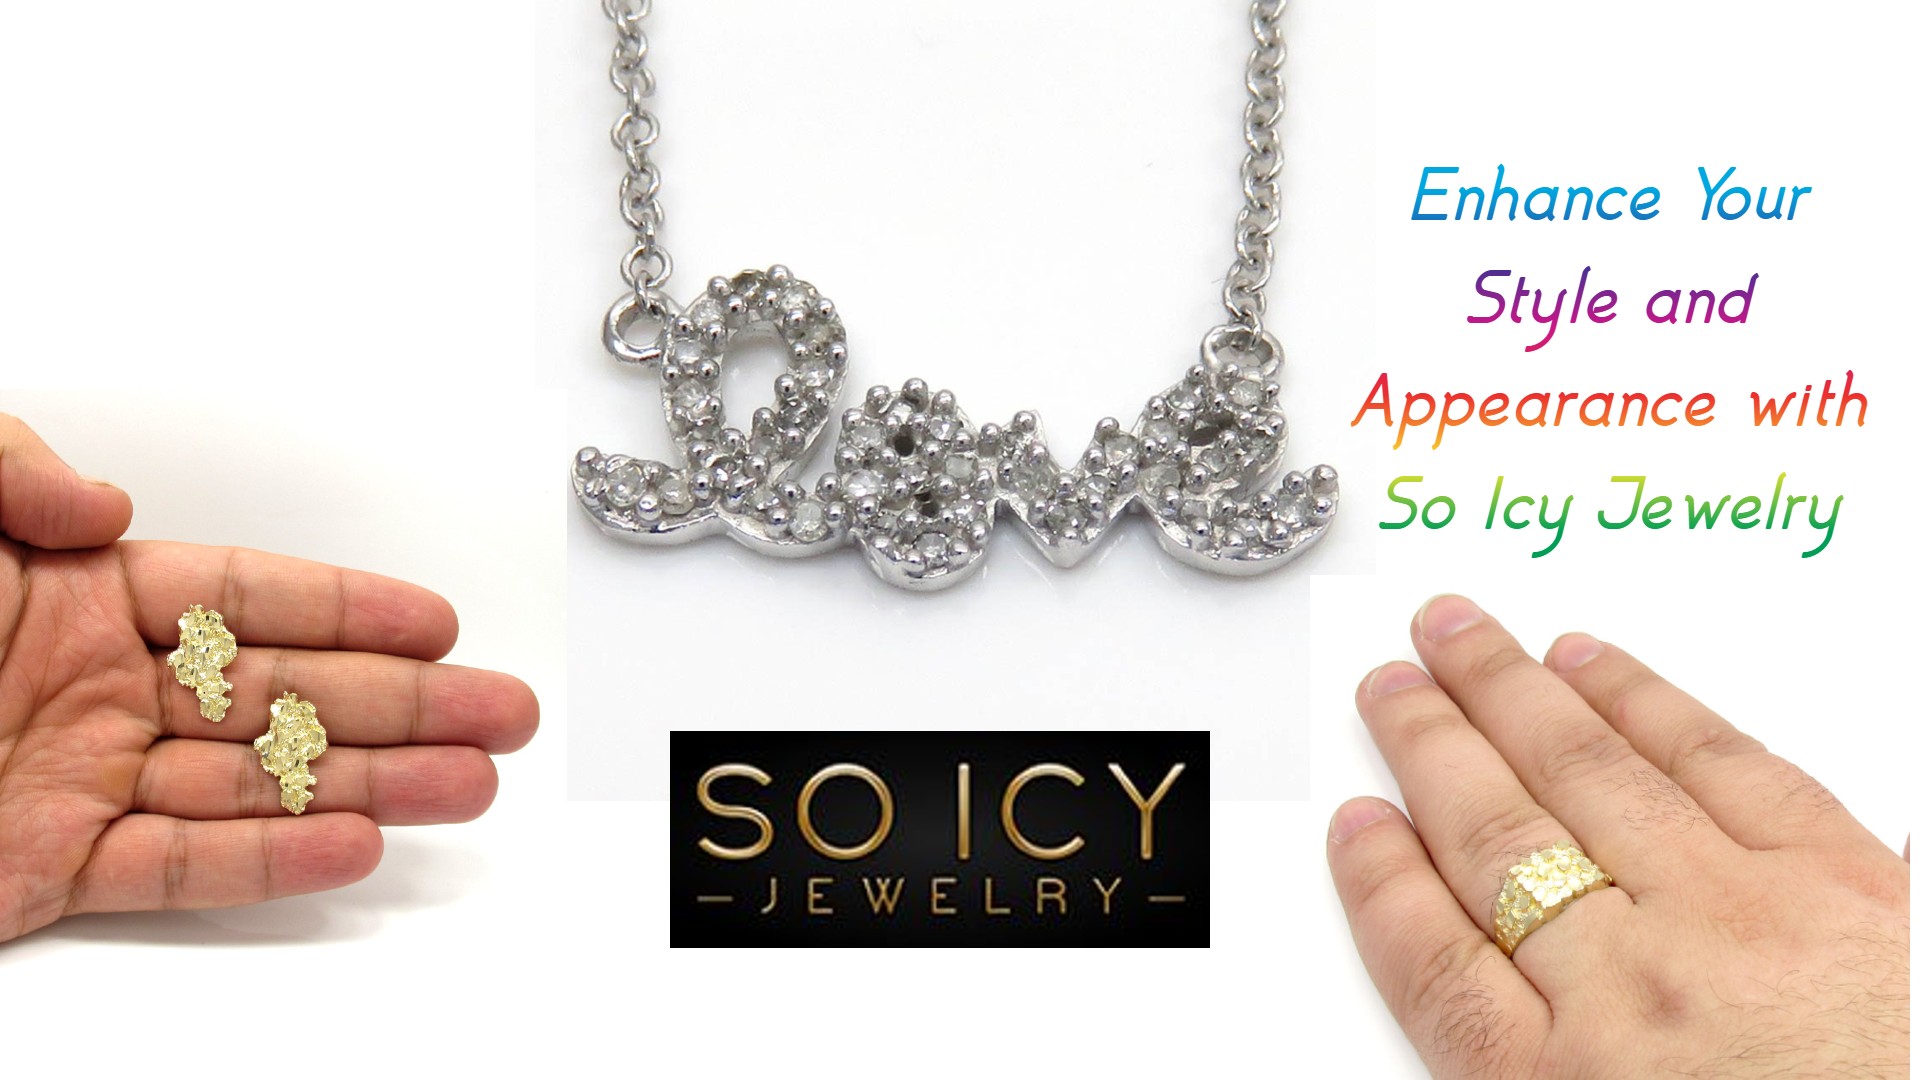 Enhance Your Style and Appearance with So Icy Jewelry